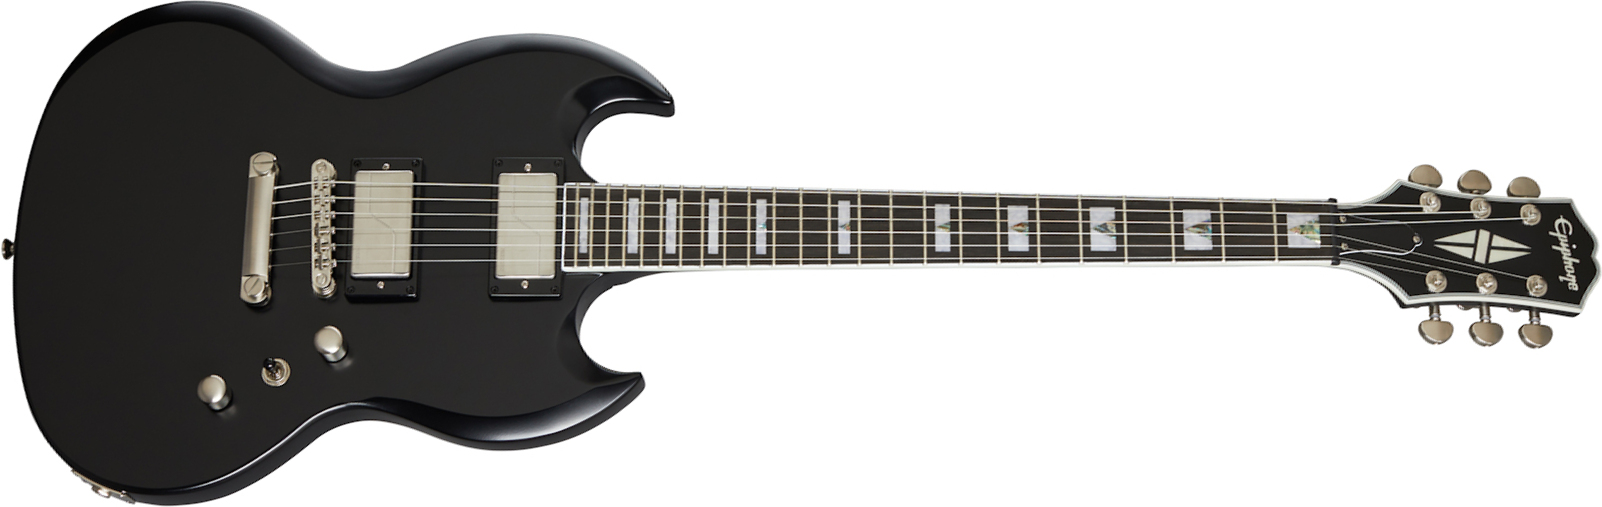 Epiphone Sg Prophecy Modern 2h Fishman Fluence Ht Eb - Black Aged - Double cut electric guitar - Main picture